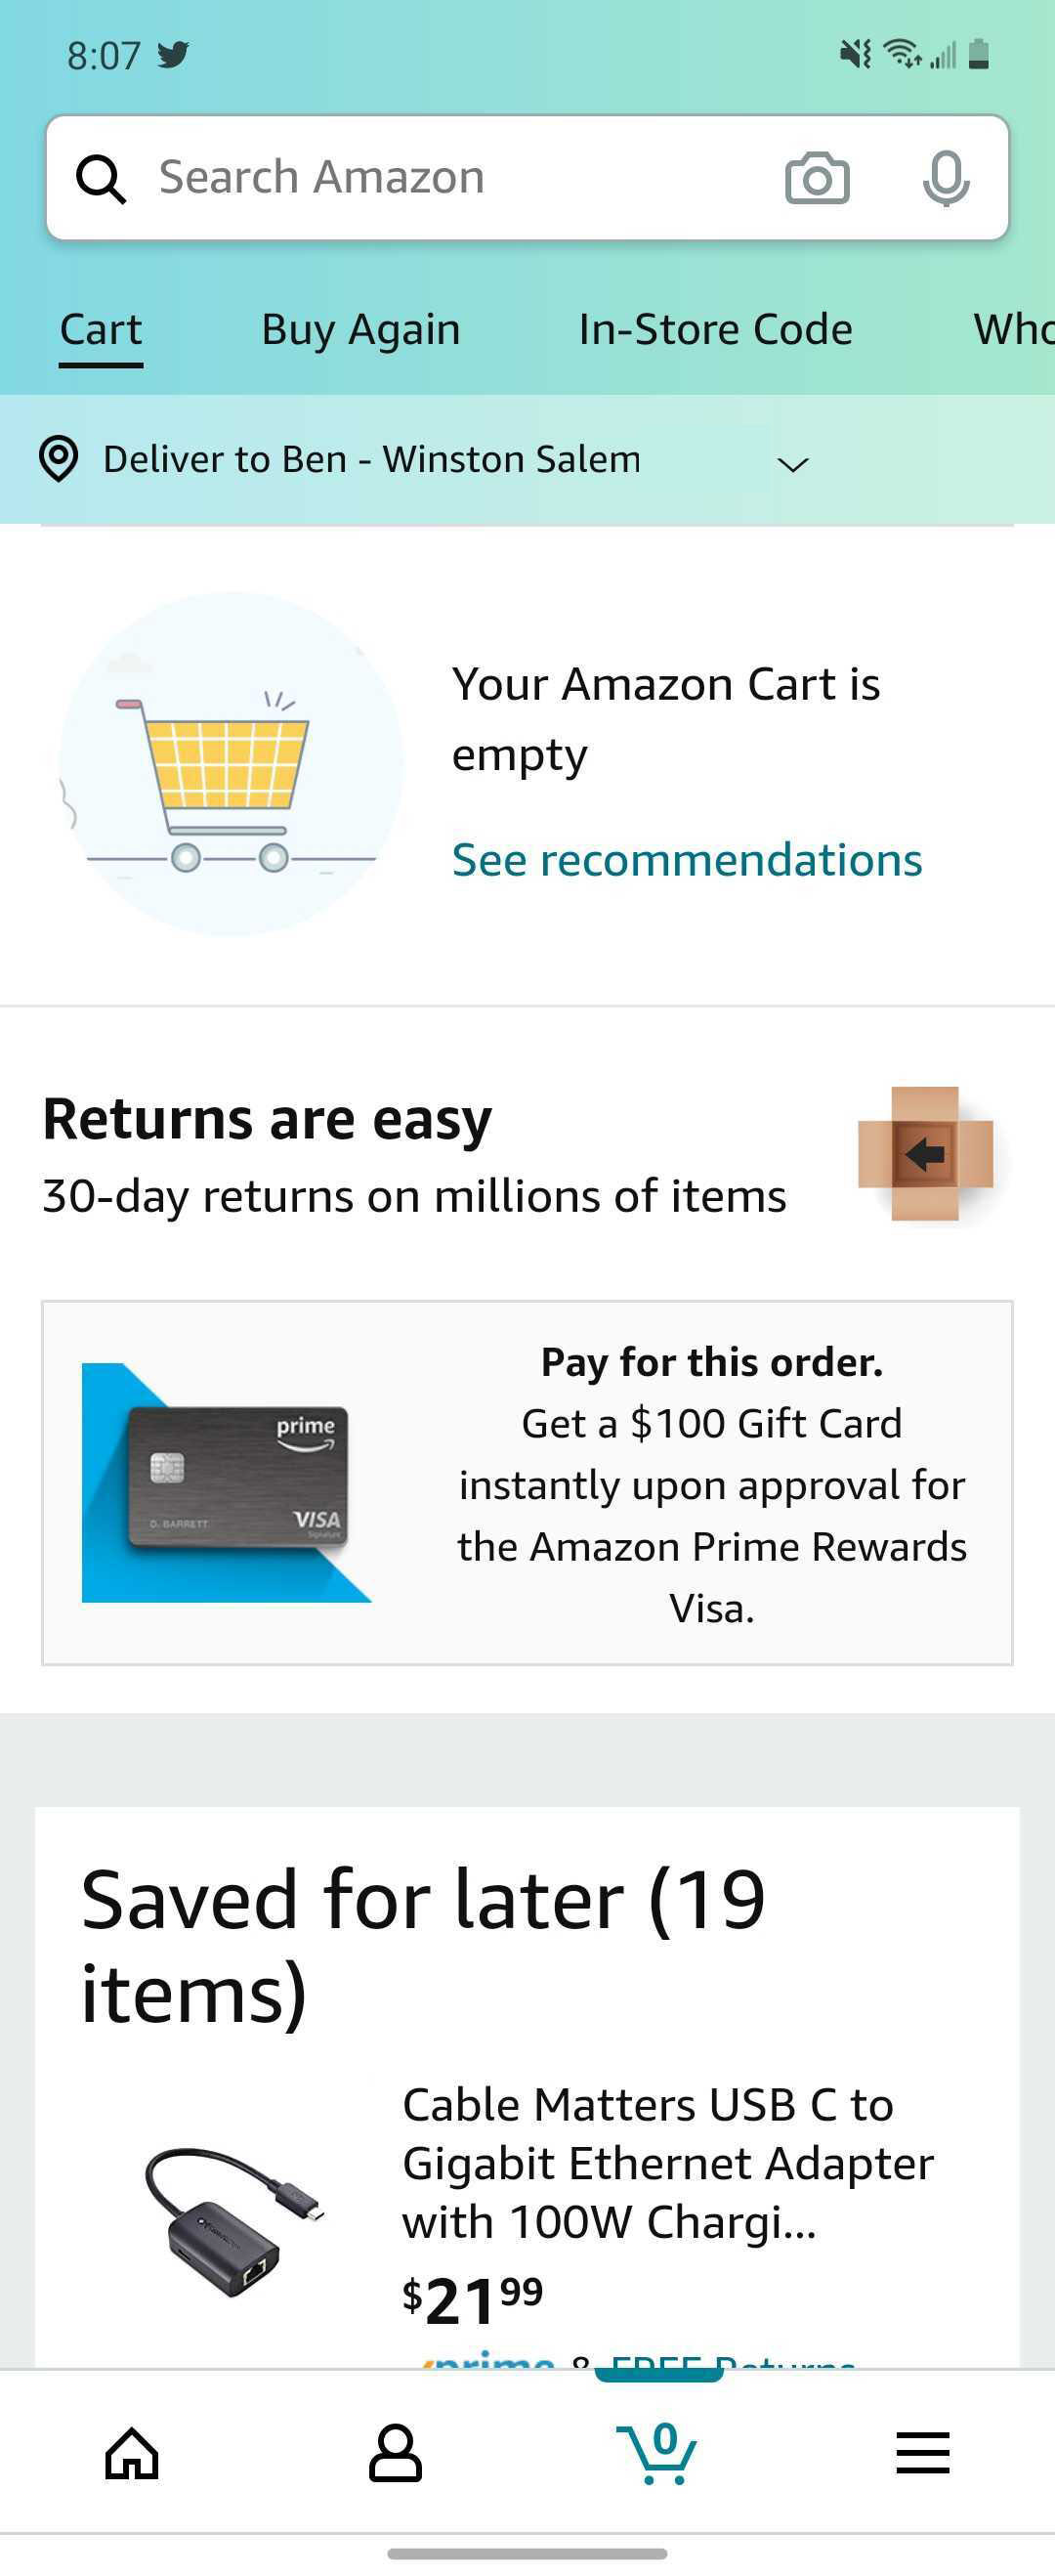 Amazon app redesign rolls out to Android w/ bottom bar nav - 9to5Google